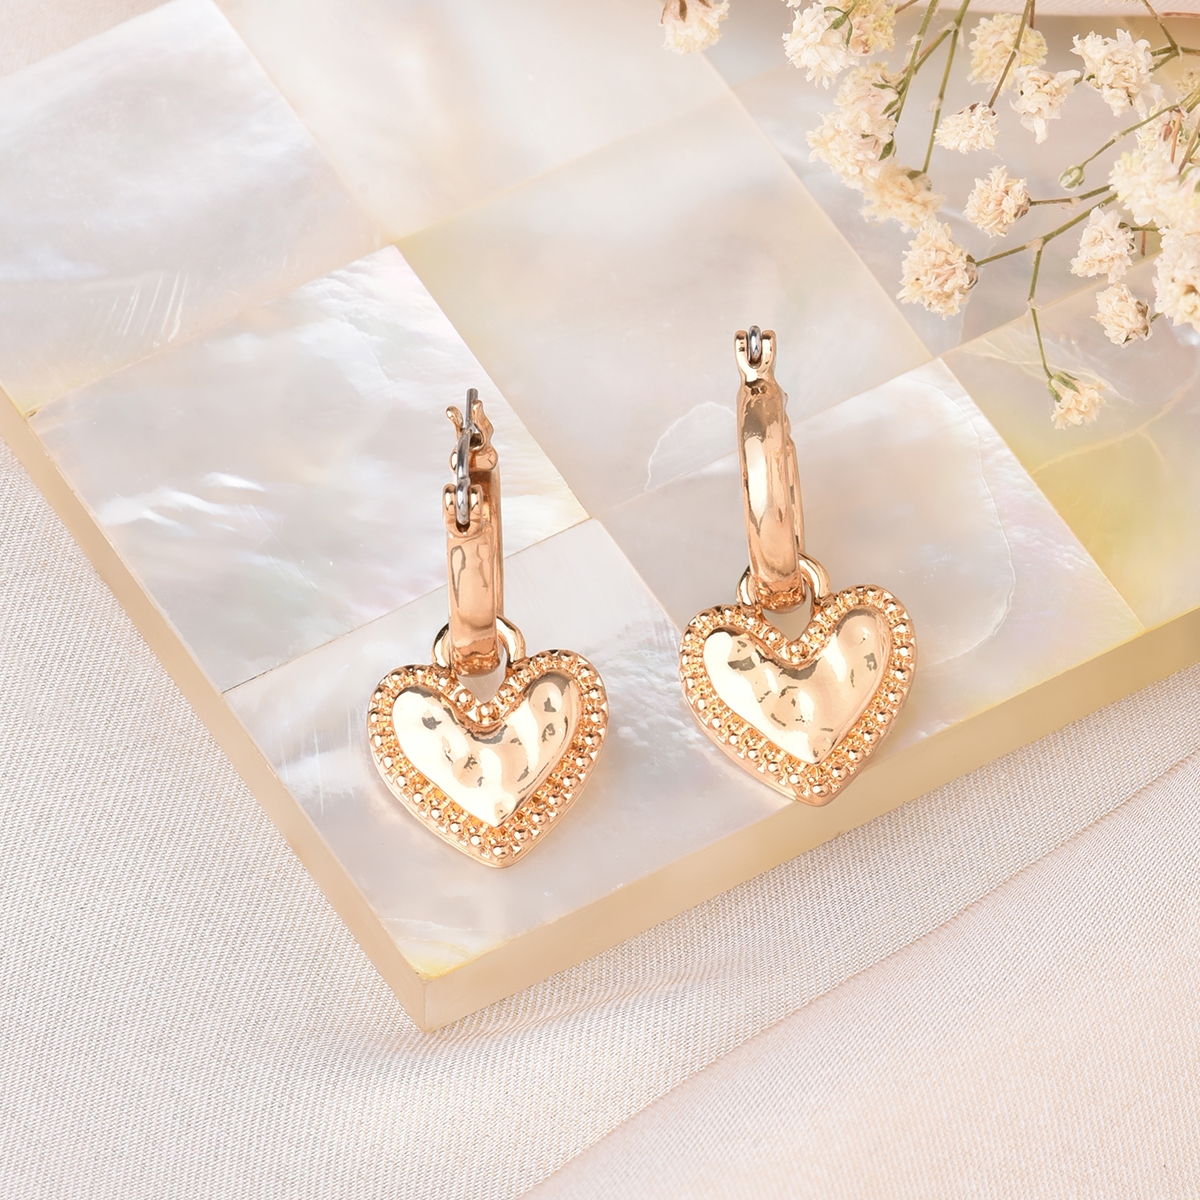 Lilly & sparkle | Lilly & Sparkle Gold Toned Hoop Earrings With Heart Charm